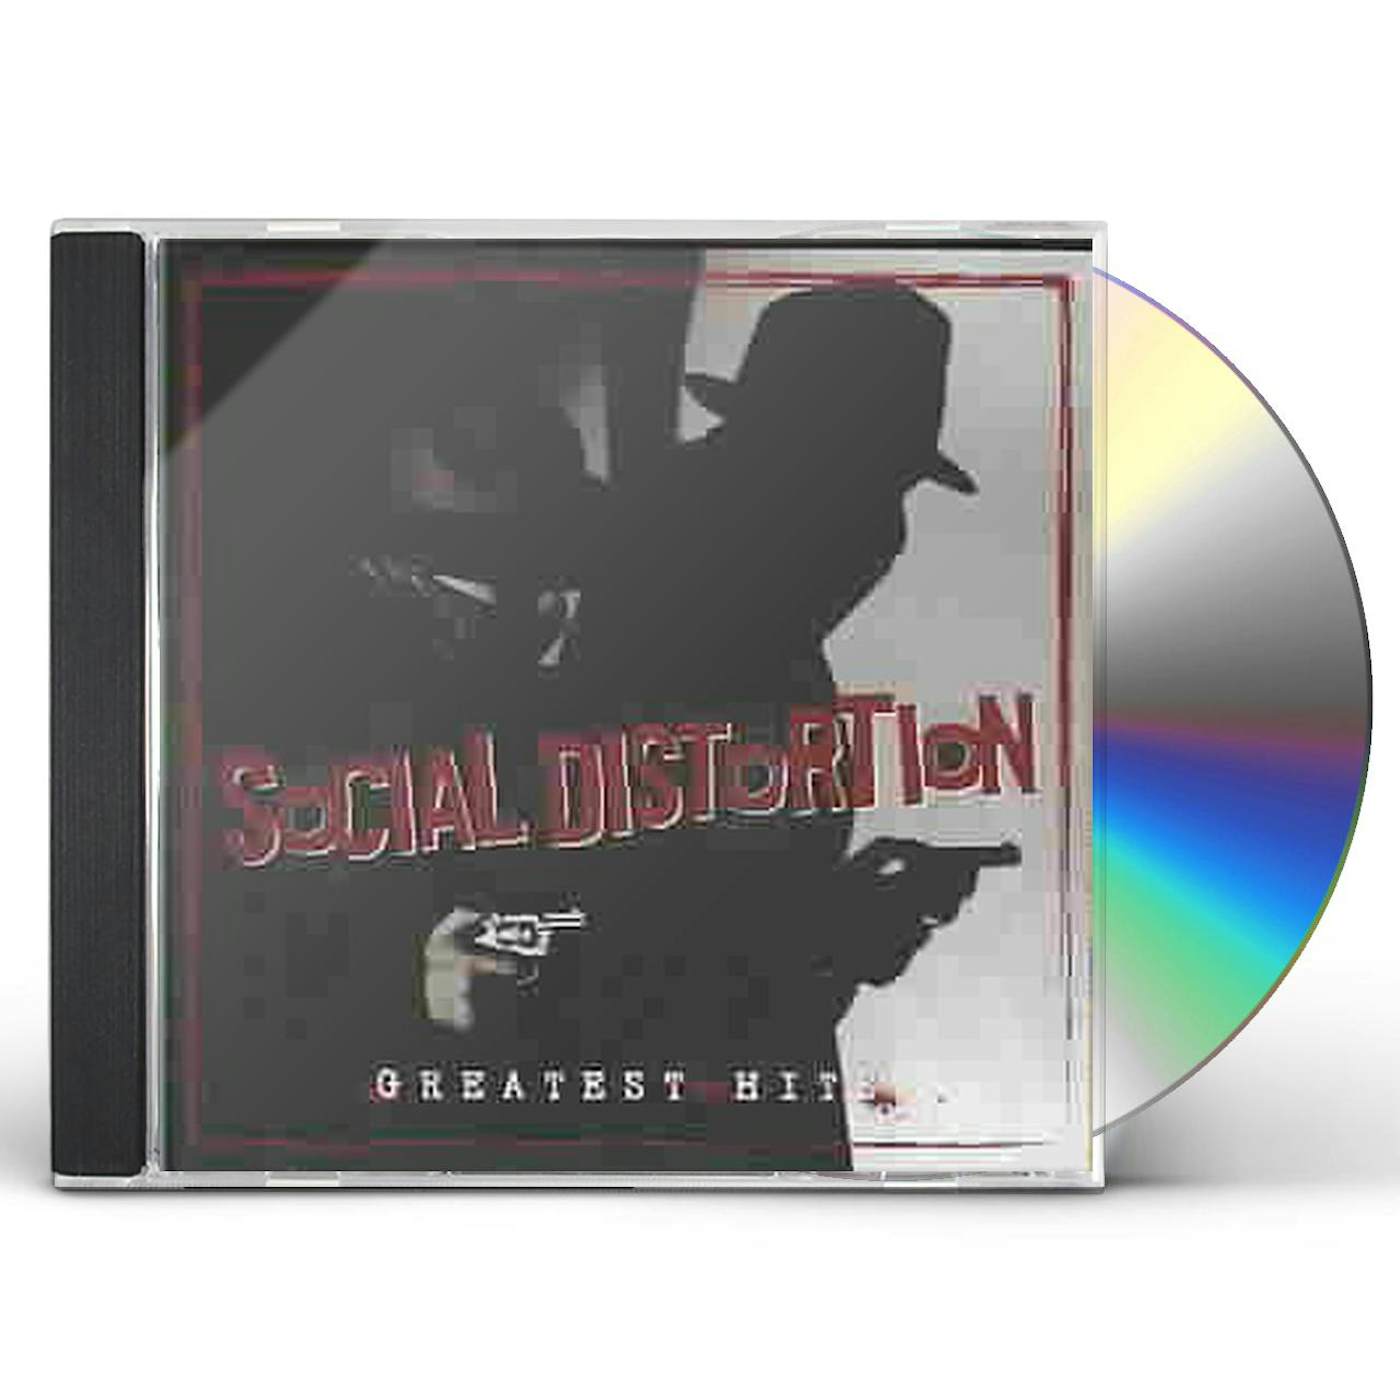 Social Distortion GREATEST HITS CD